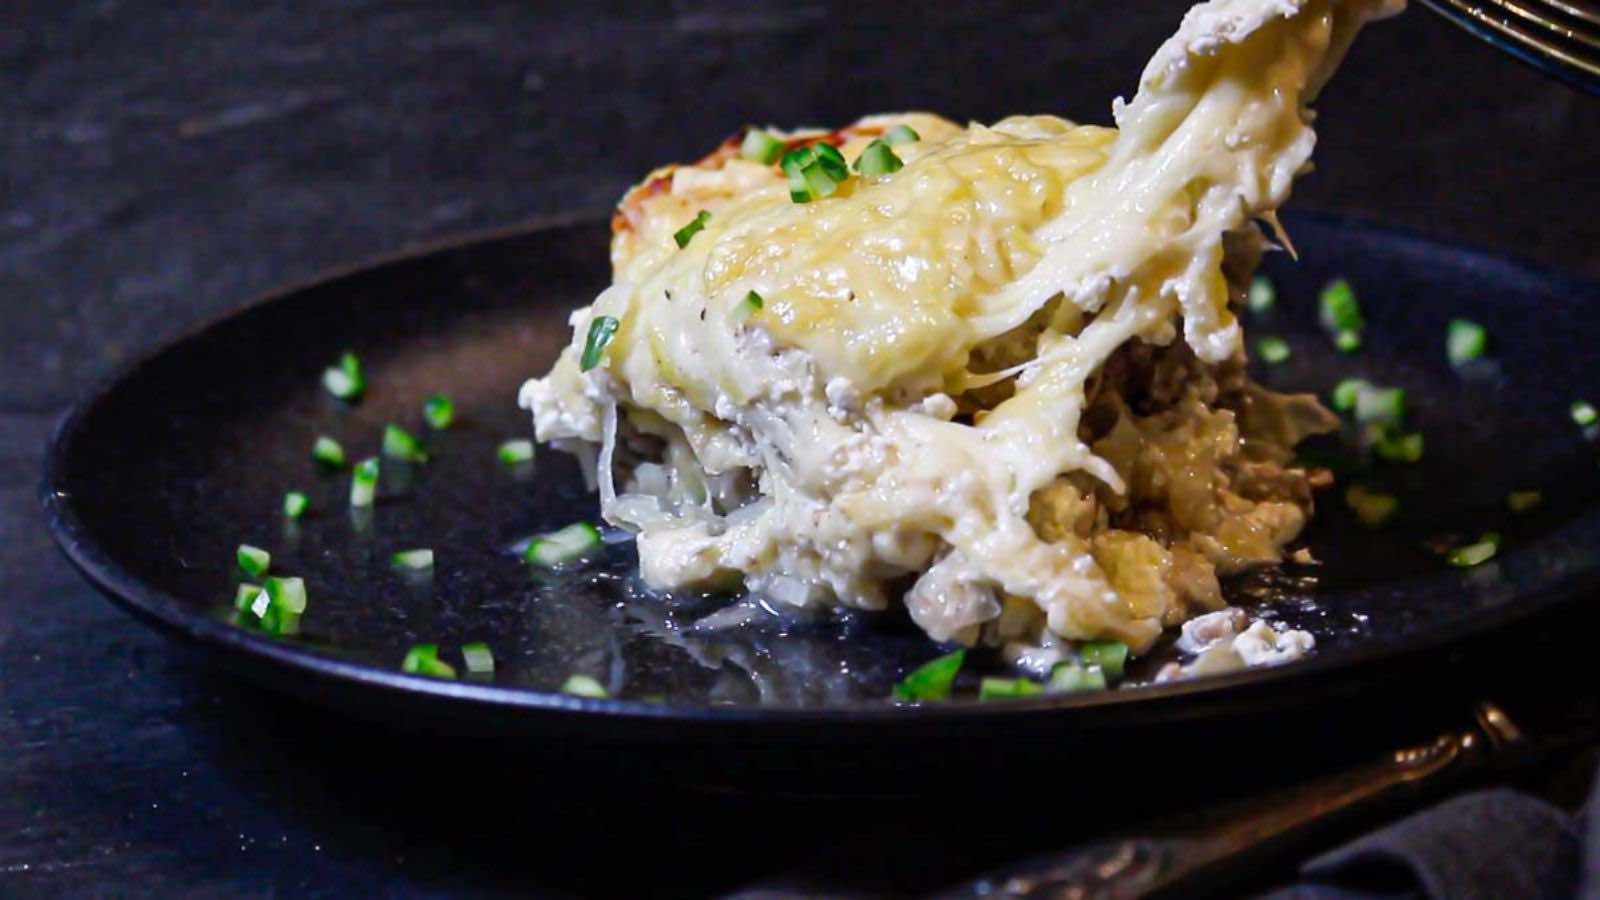 Dive Into Nostalgia With These 13 Classic Casseroles